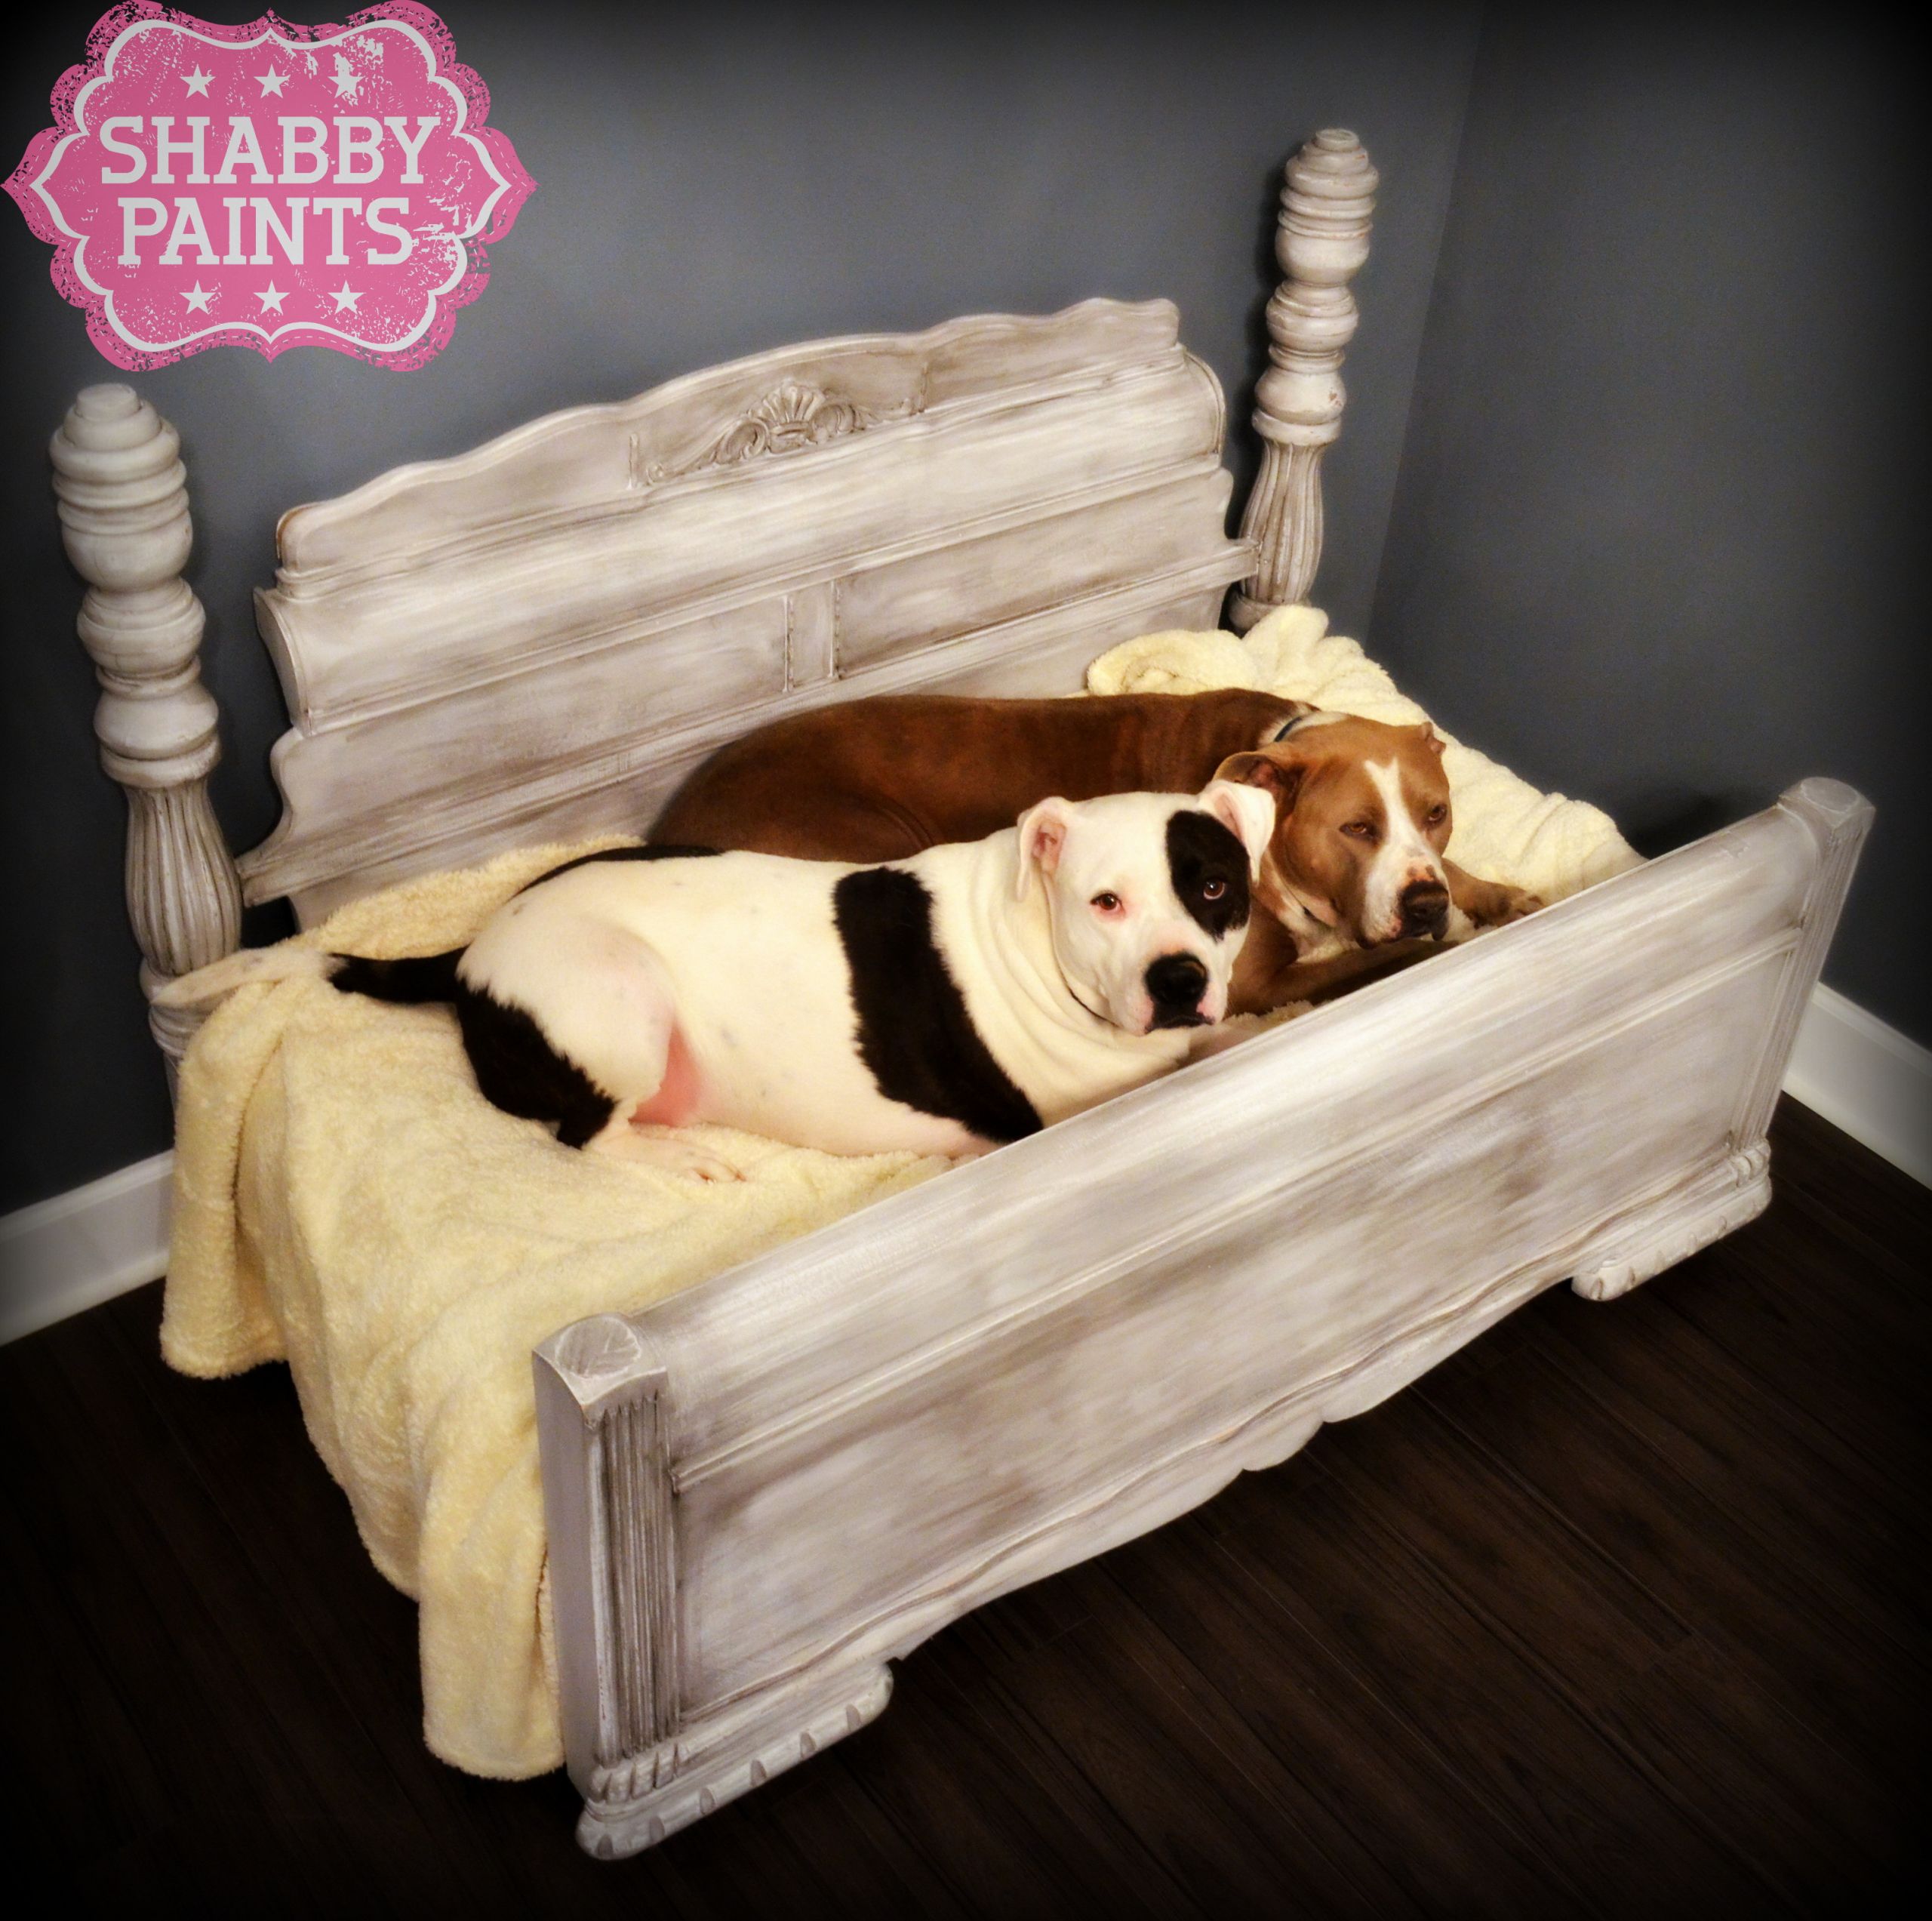 DIY Dog Furniture
 Upcycled Pet Beds Transformed with Shabby Paints Shabby